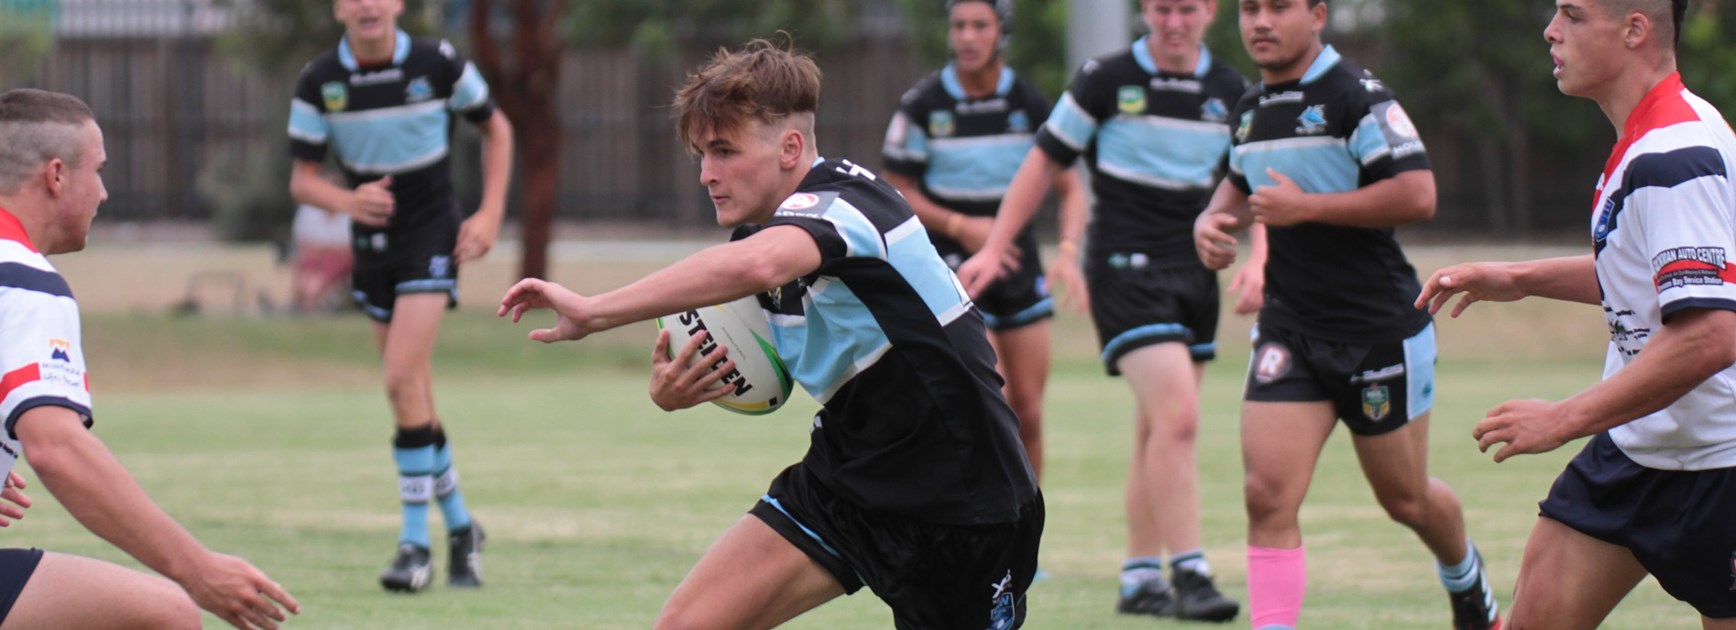 Junior Sharks in solid trial hit outs